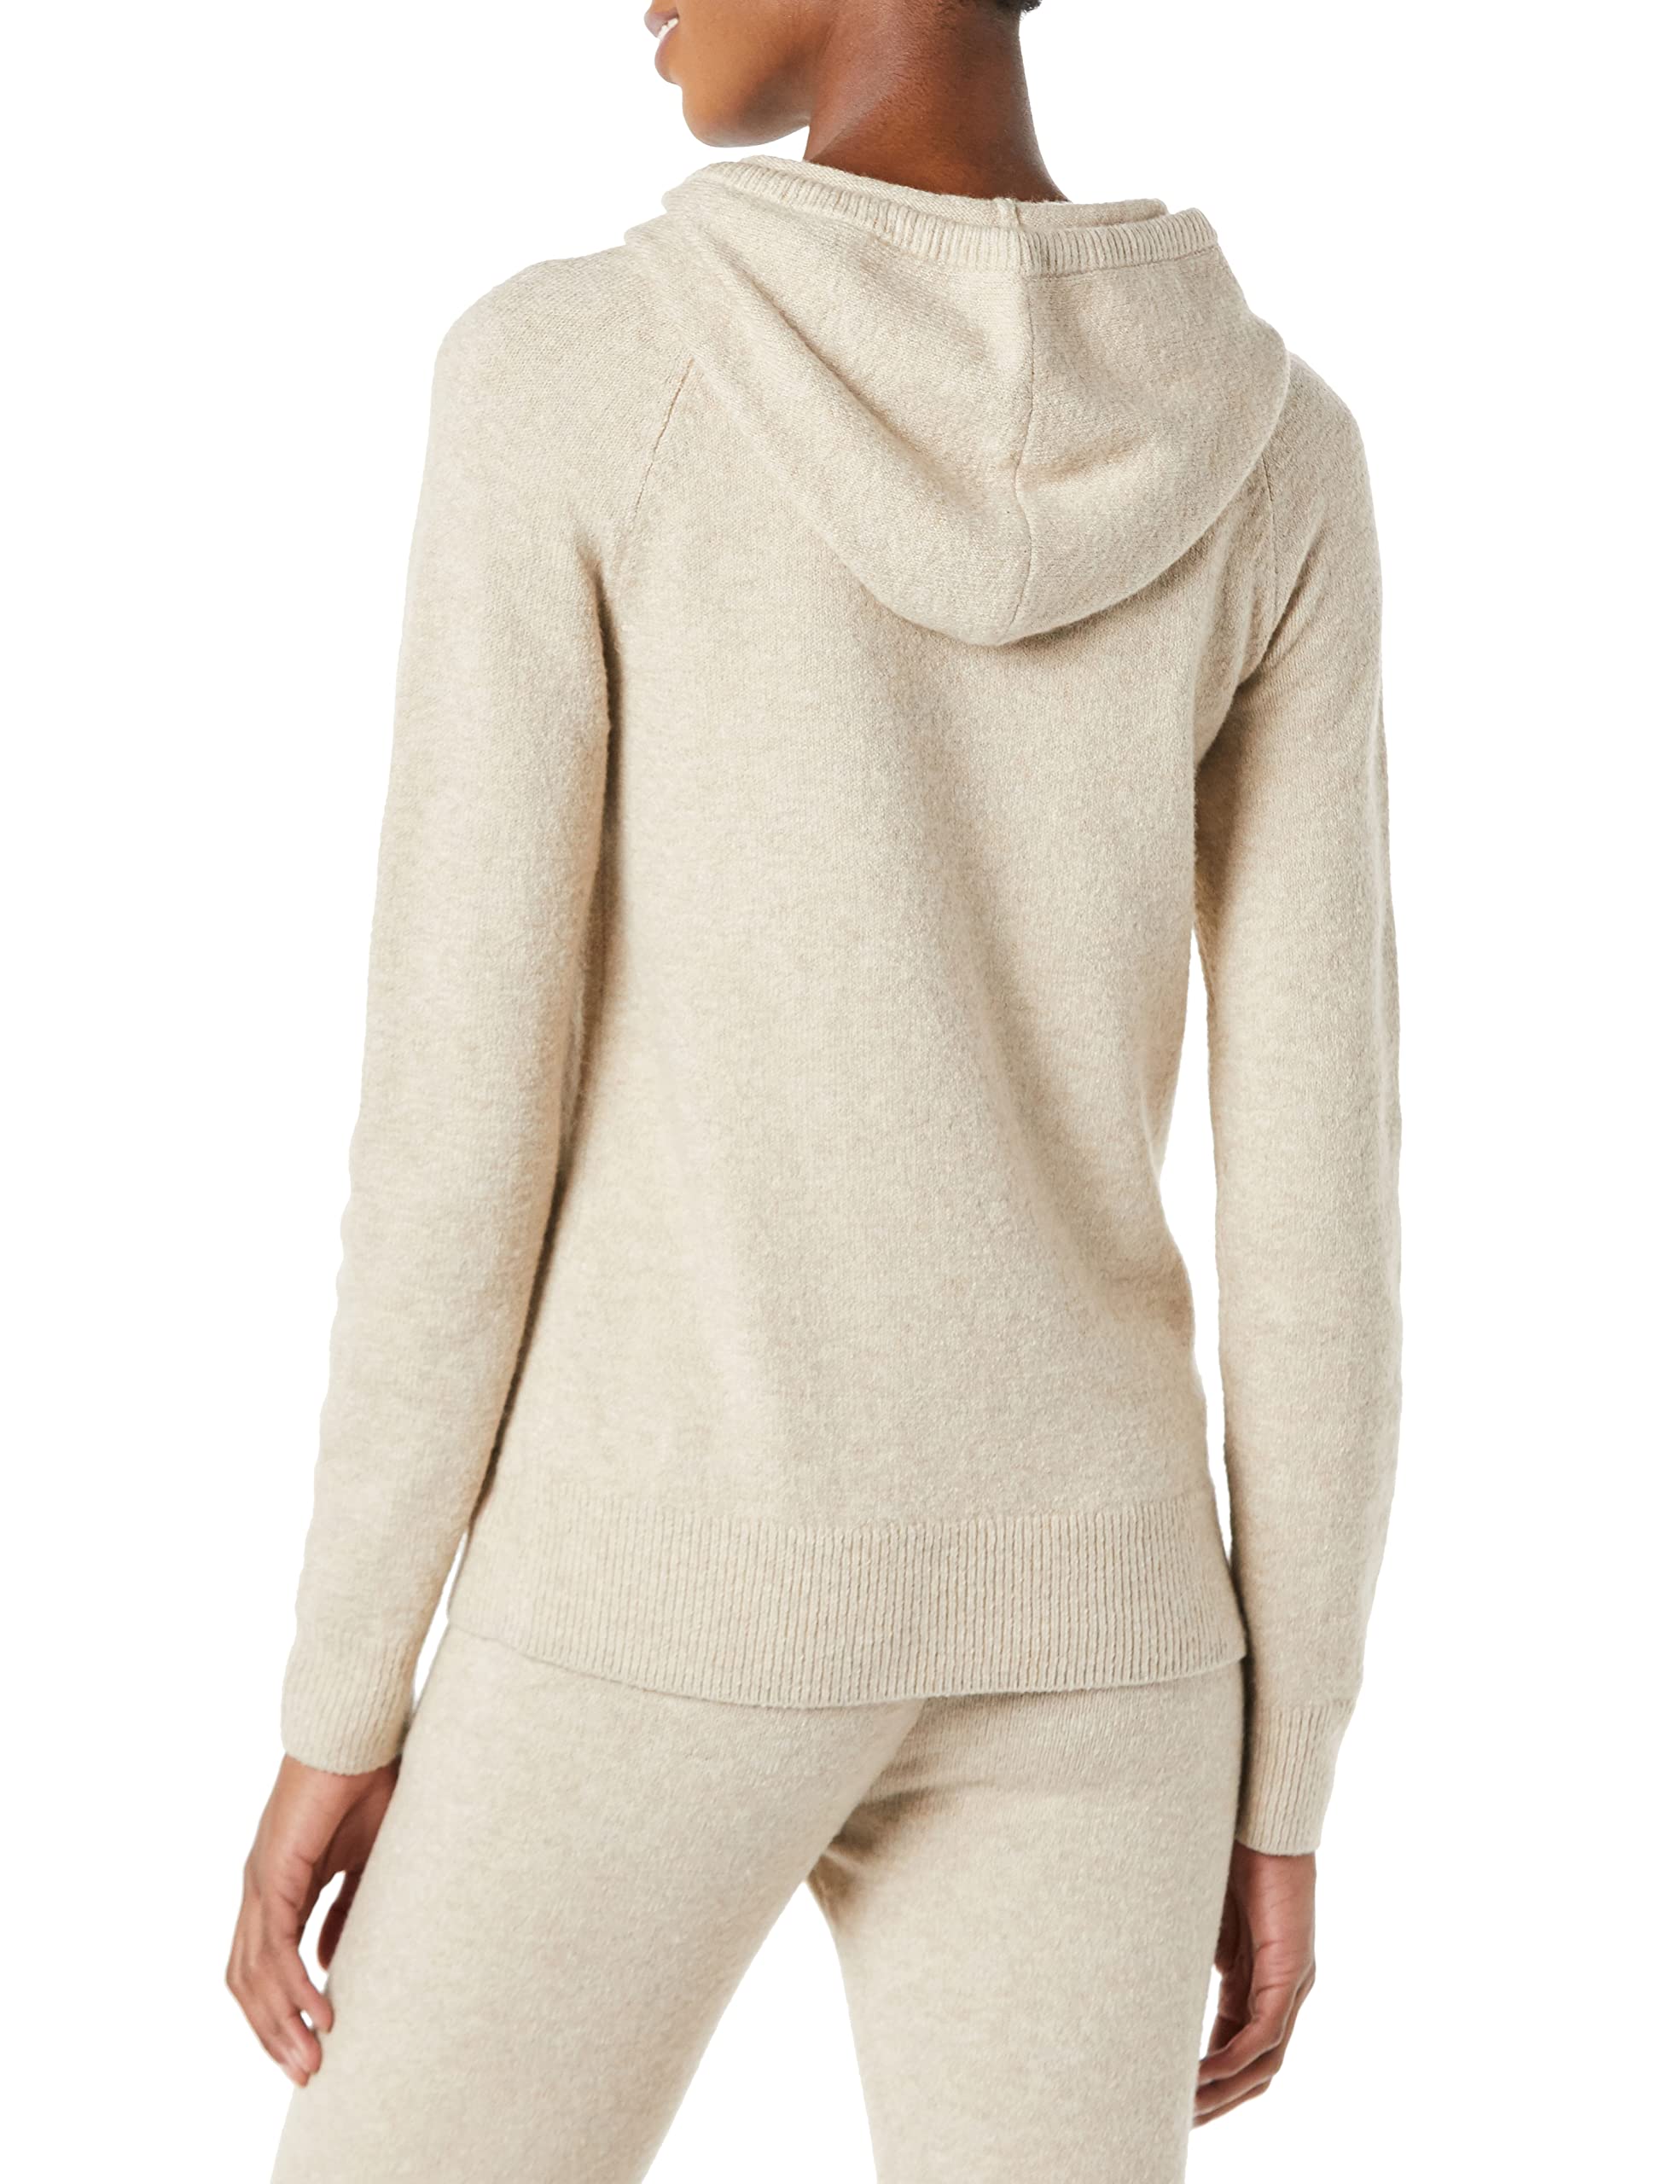 Amazon Essentials Women's Soft Touch Hooded Pullover Sweater